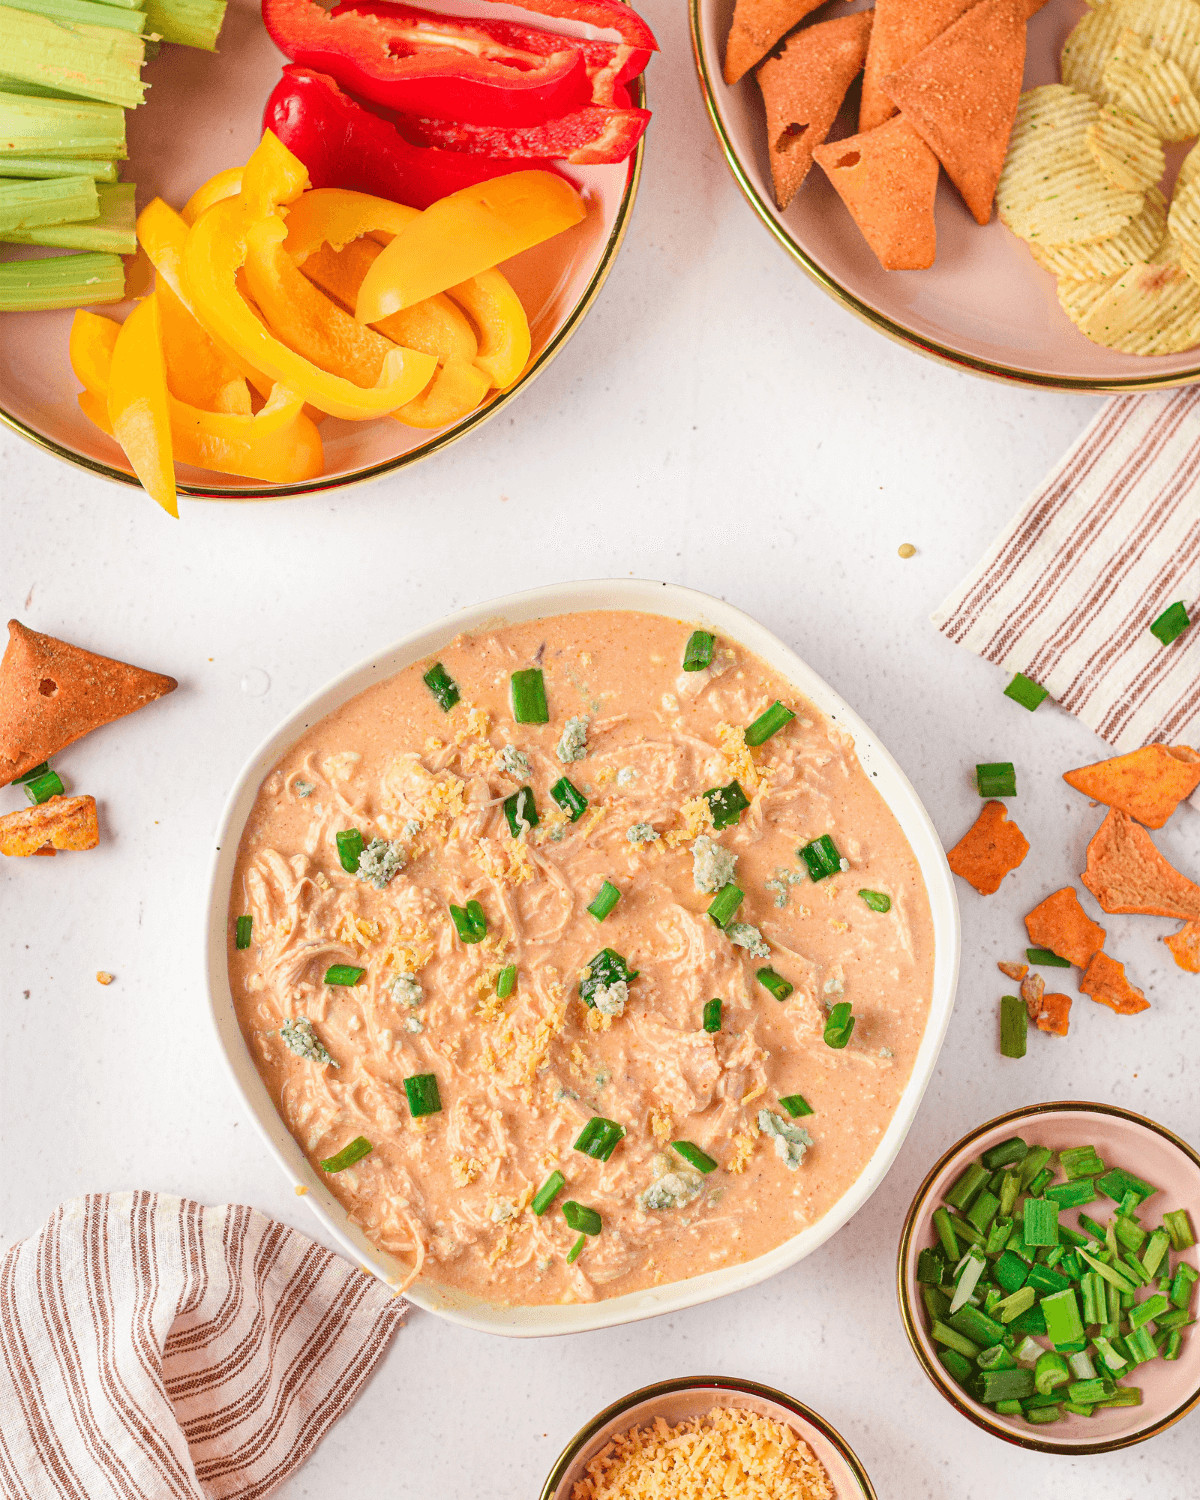 A side of vegetables and chips next to a dish of instant pot buffalo chicken dip.